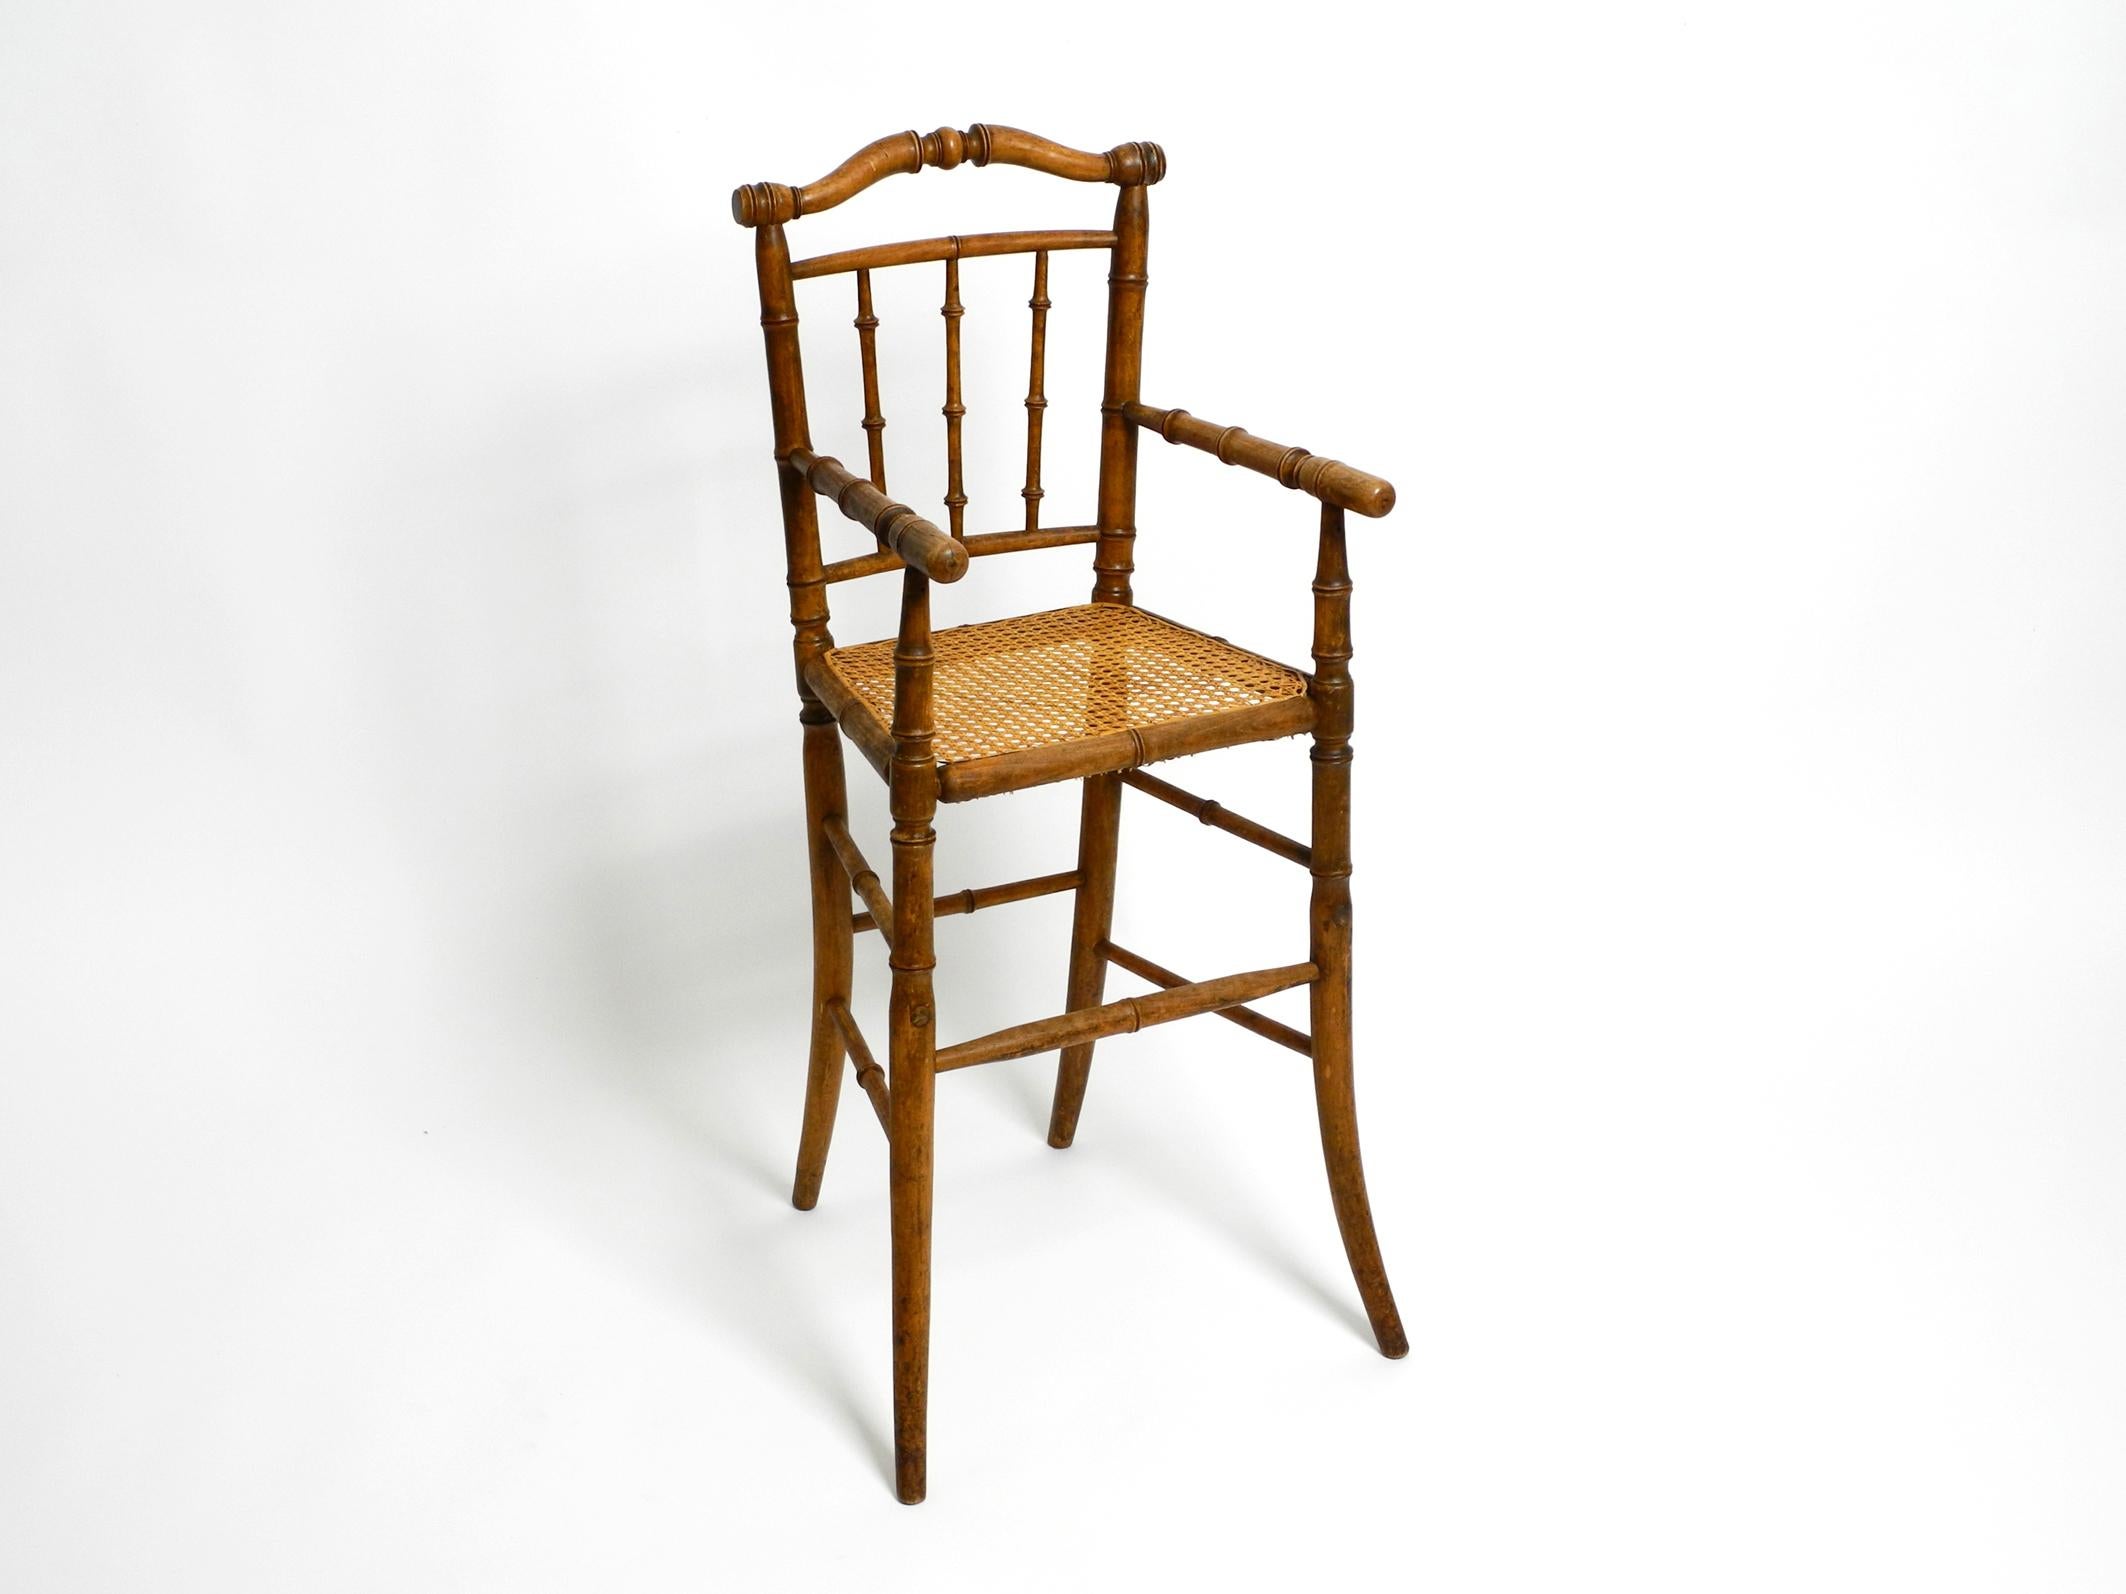 Beautiful high French table children's highchair from the 1930s in bentwood.
Bentwood is mostly made from maple or beech wood. Seat made of Viennese wicker.
Very good original vintage condition with no damage. The seat weave appears to be